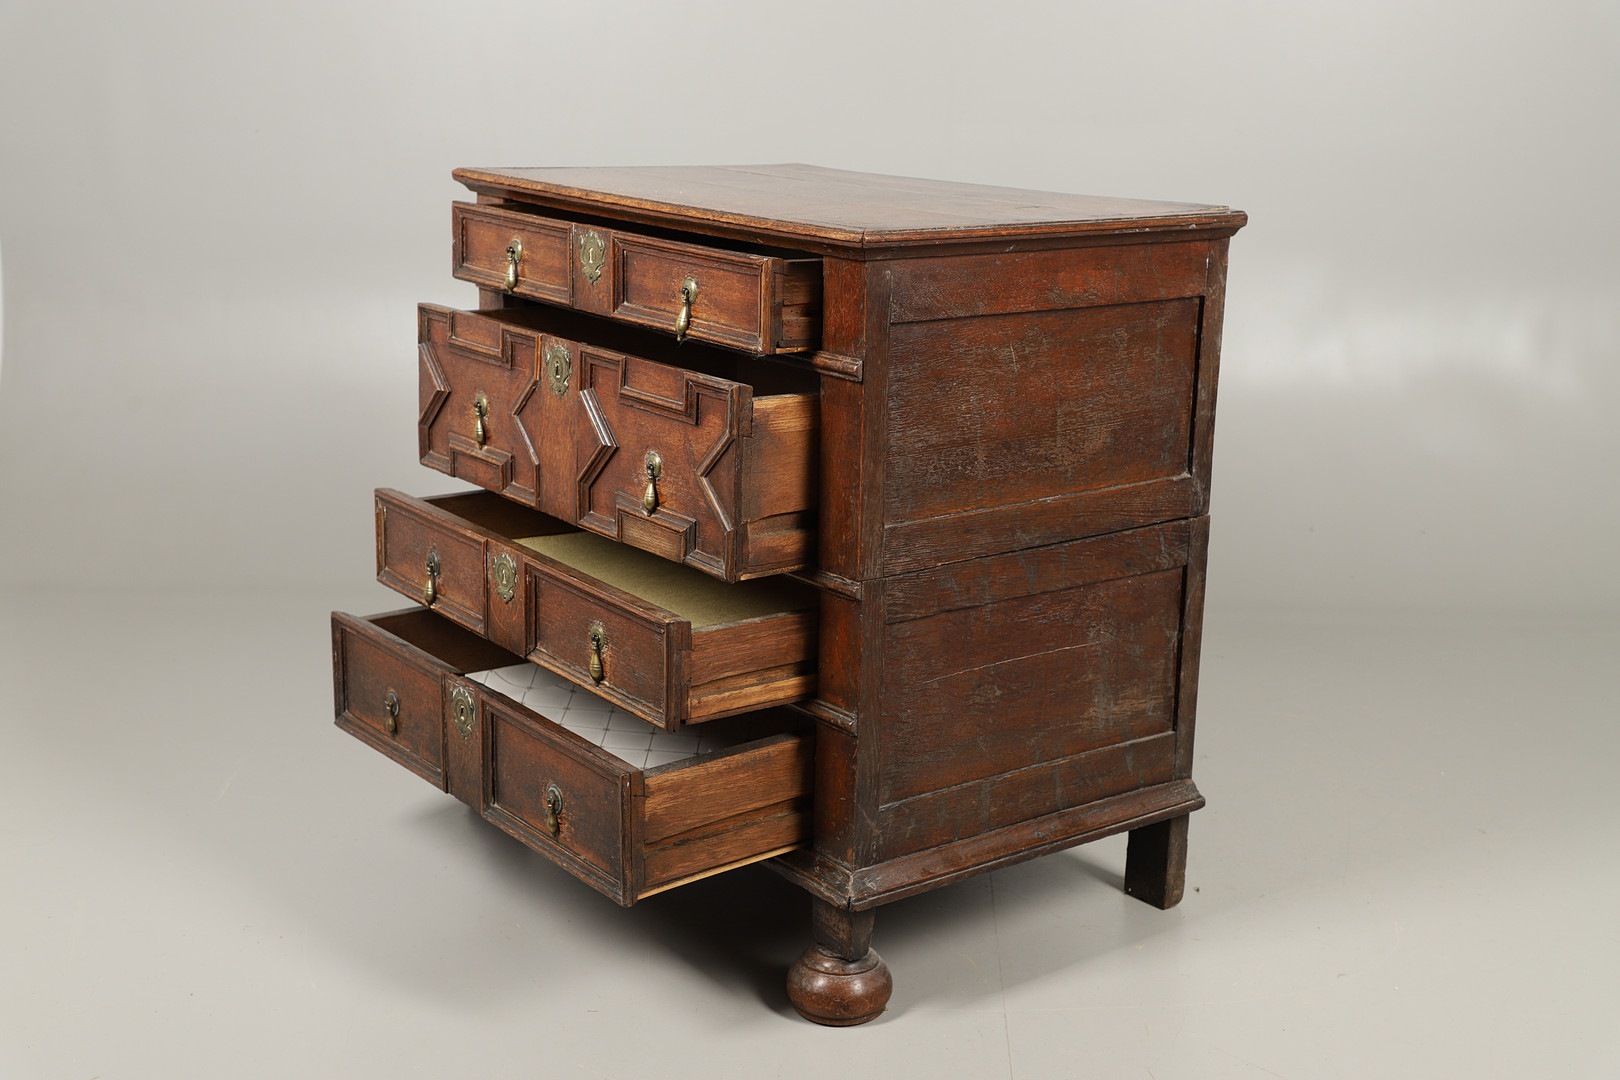 A LATE 17TH CENTURY OAK CHEST OF DRAWERS. - Image 3 of 6